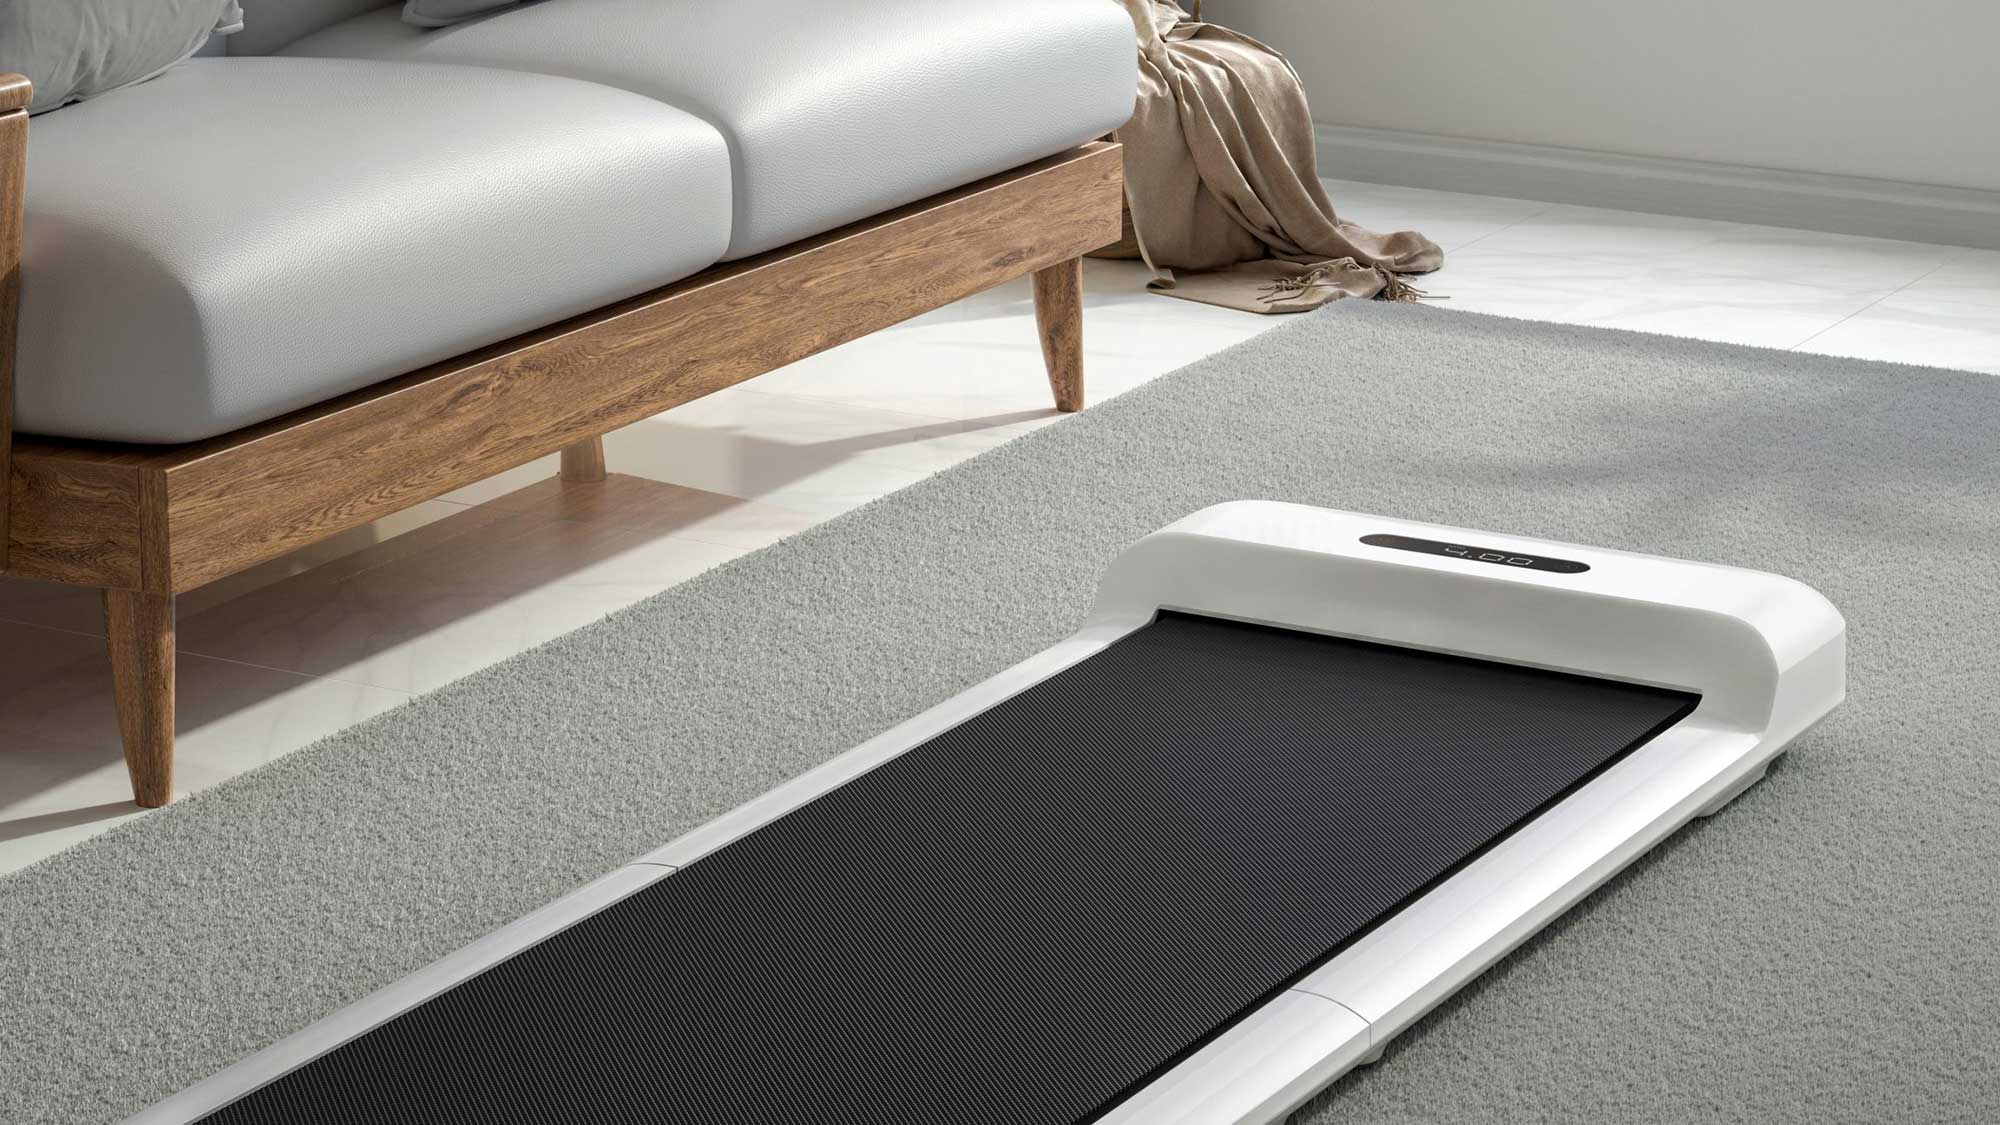 WalkingPad S1 facilitates Home Workout with its useful features